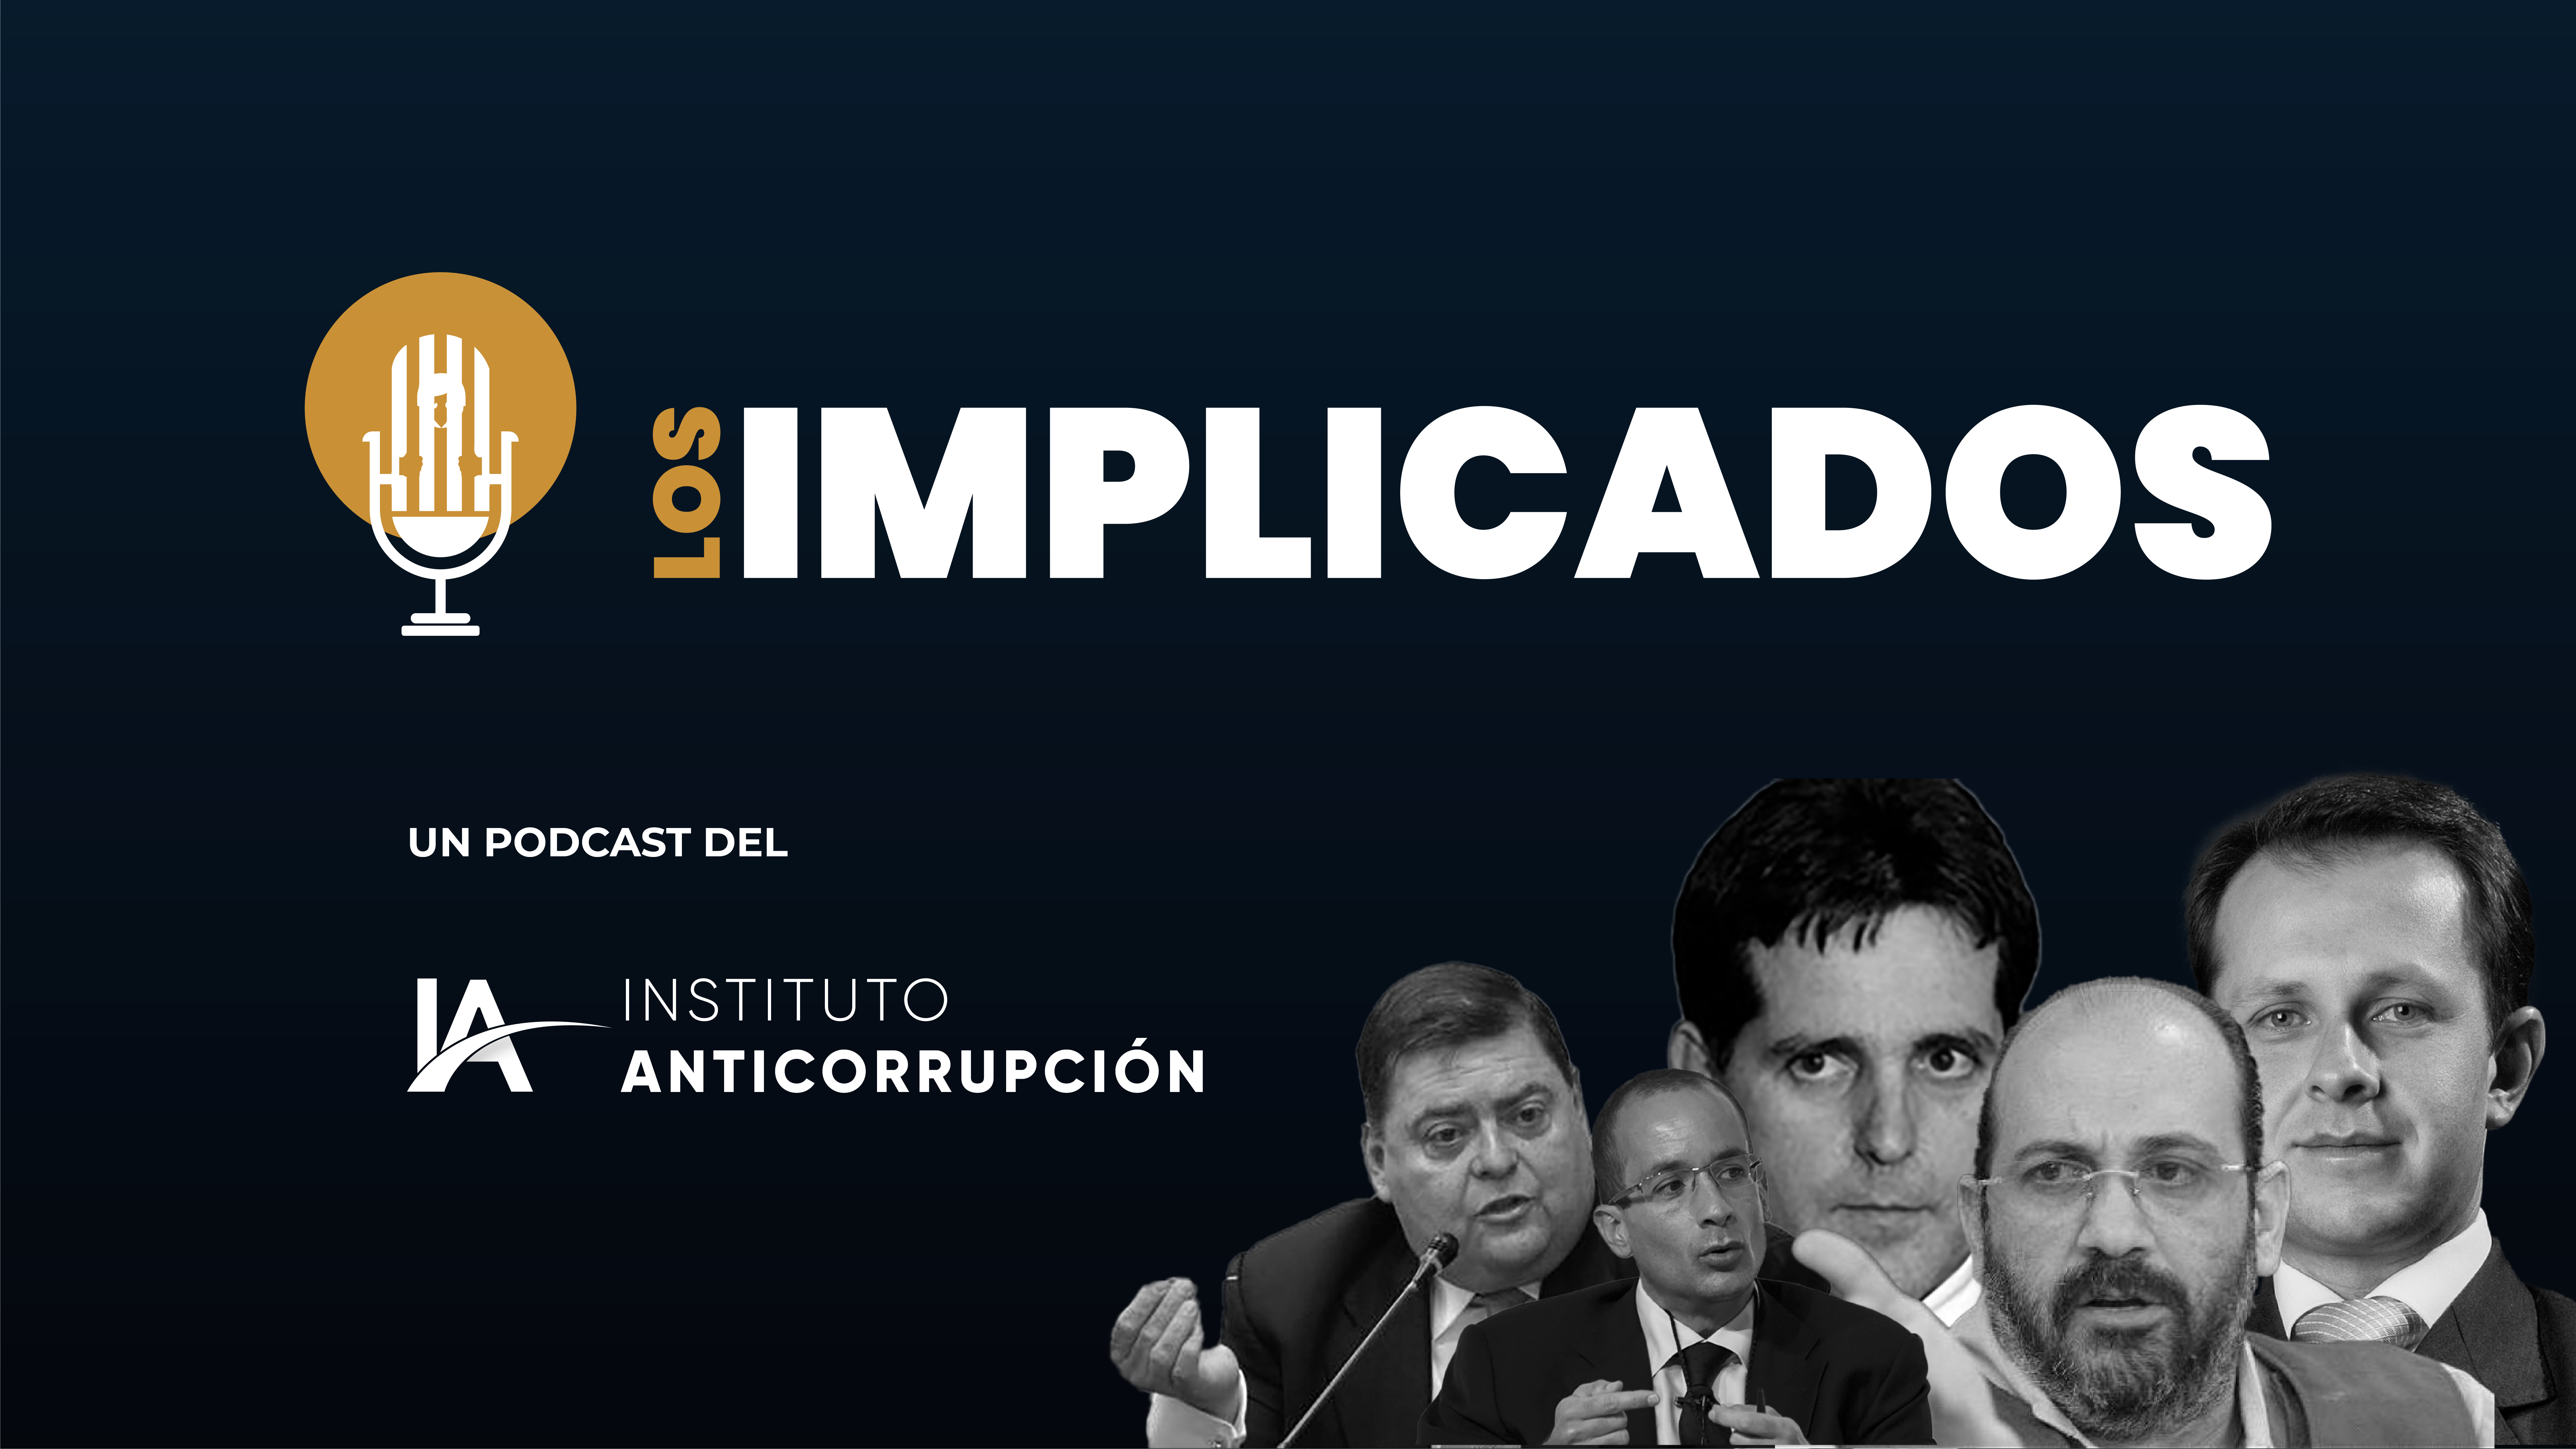 On air | ‘Parapolitics’: one of the most serious cases of corruption in Colombia is premiered on the new ‘Los Implicados’ (The Implicated) podcast